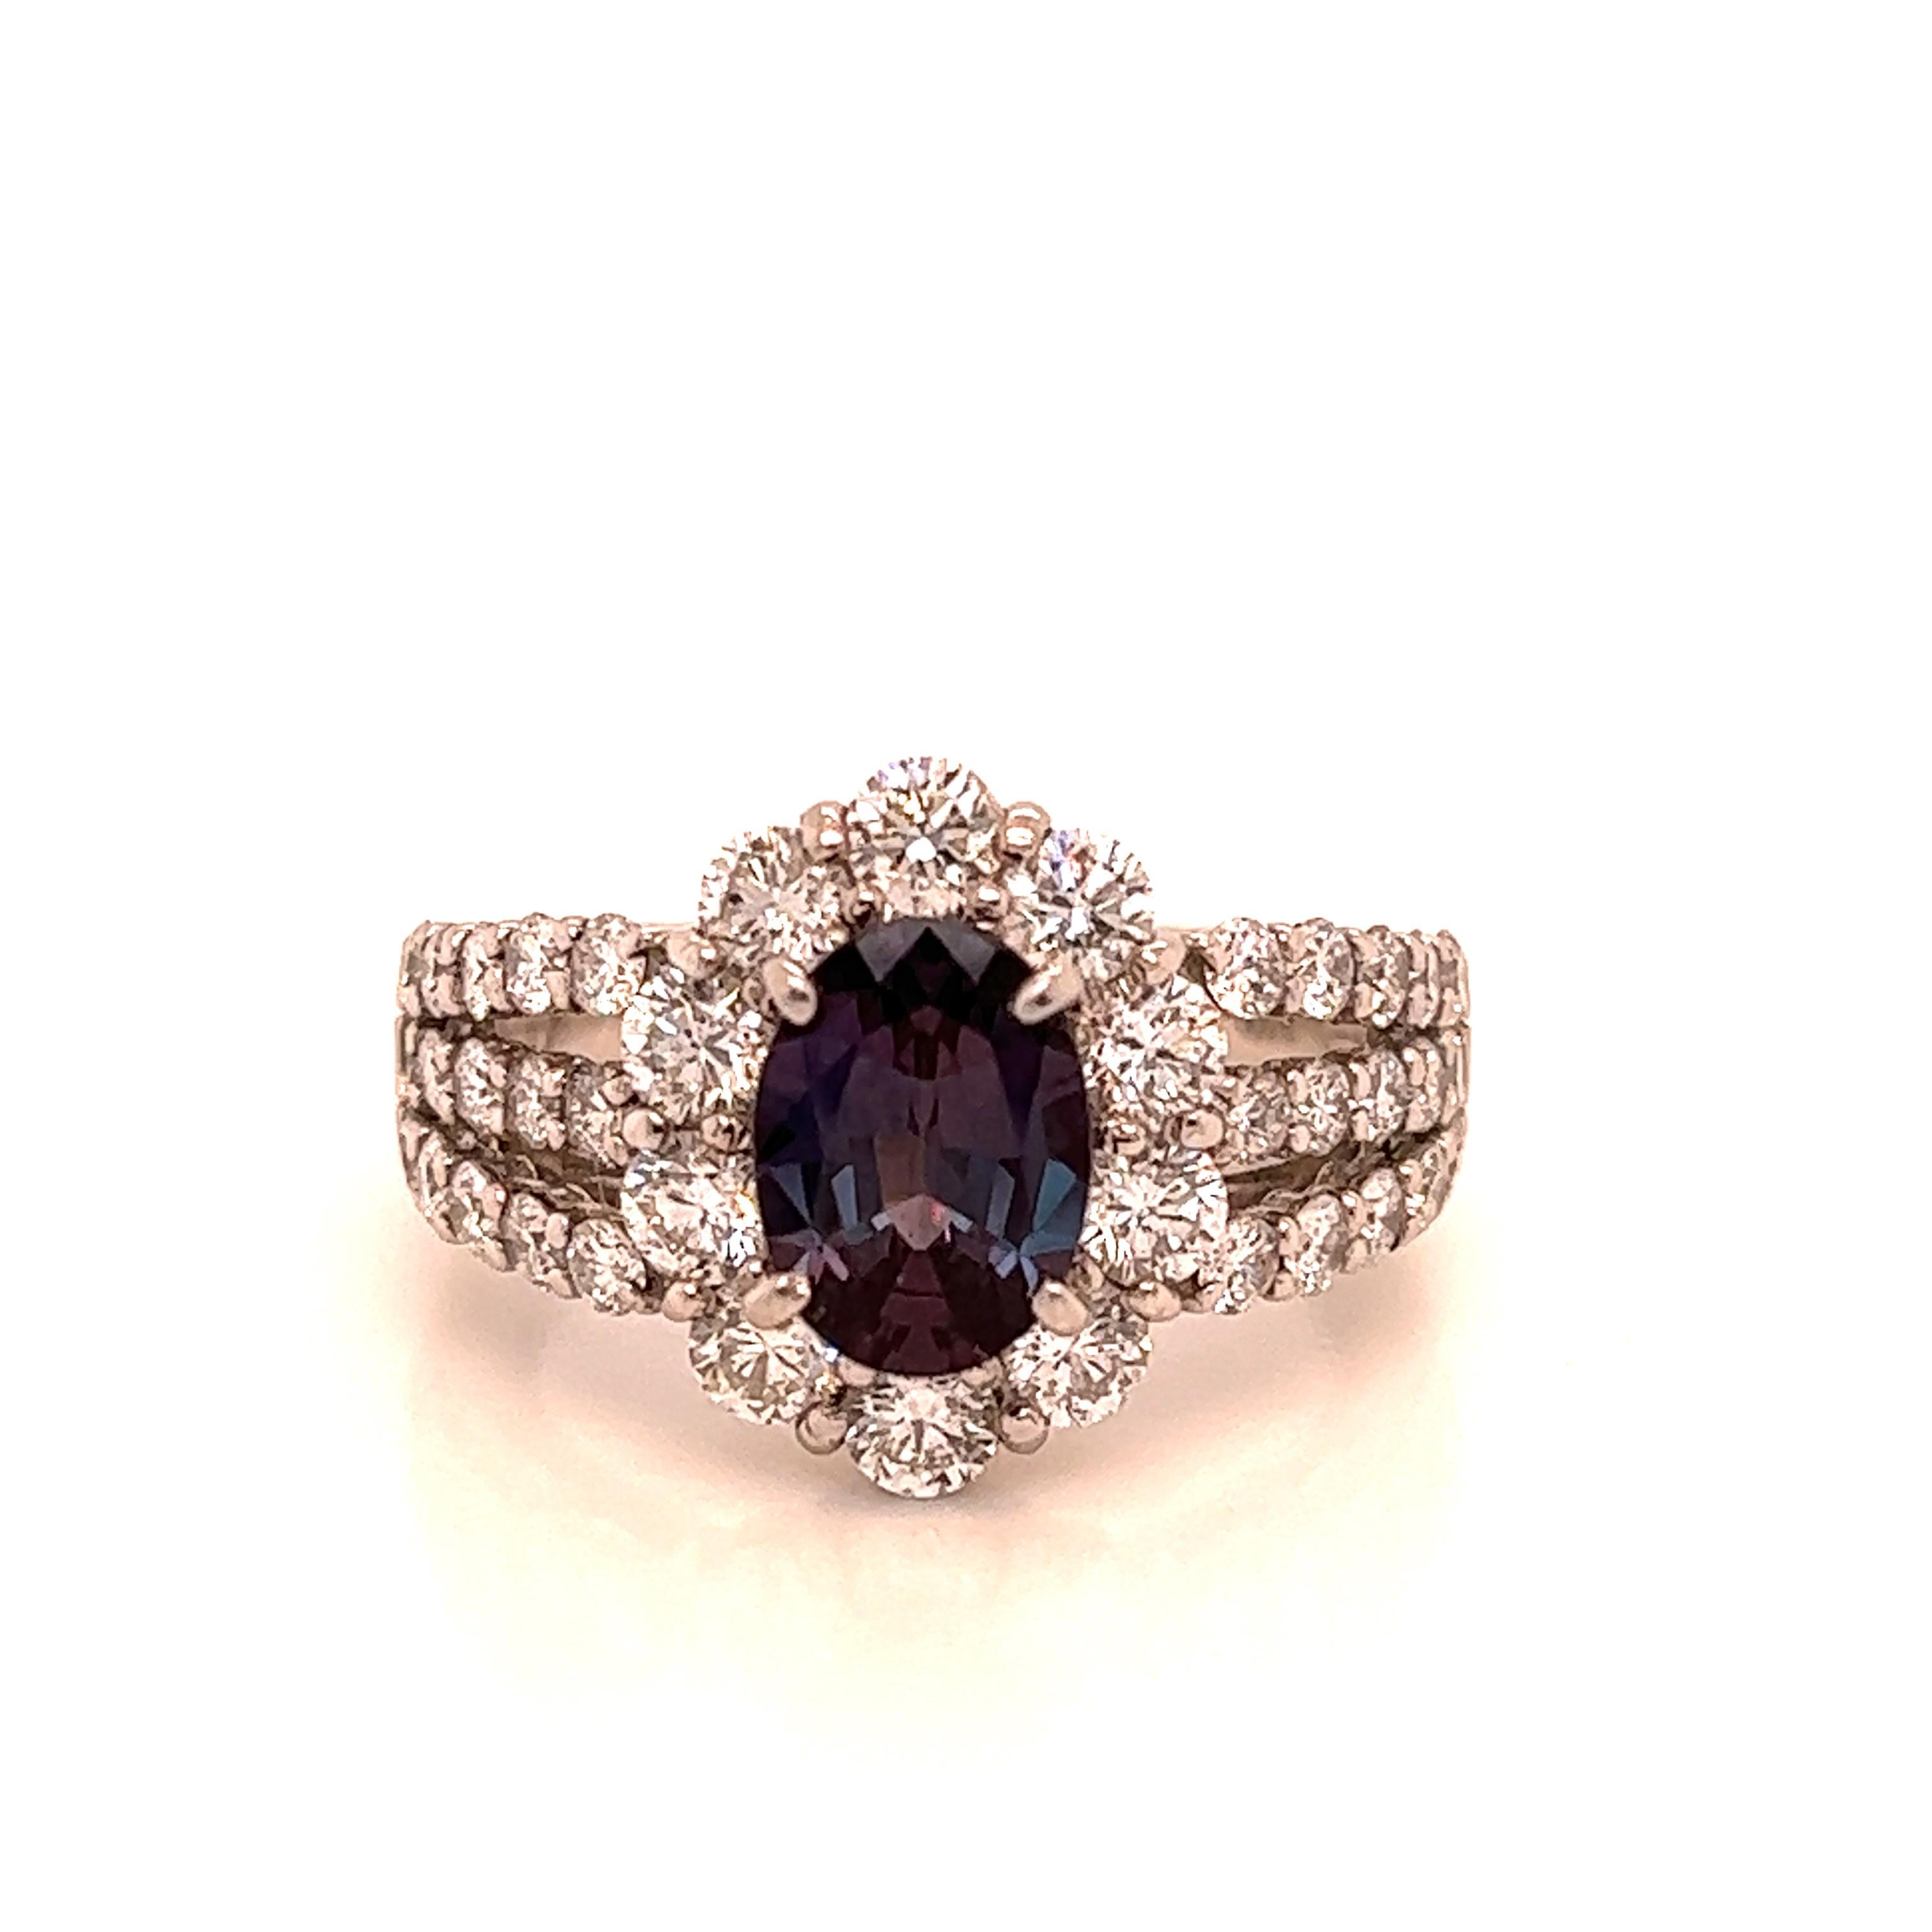 This is a gorgeous natural AAA quality oval Alexandrite surrounded by dainty diamonds that is set in a vintage platinum setting. This ring features a natural 1.51 carat oval alexandrite that is certified by the Gemological Institute of America (GIA)